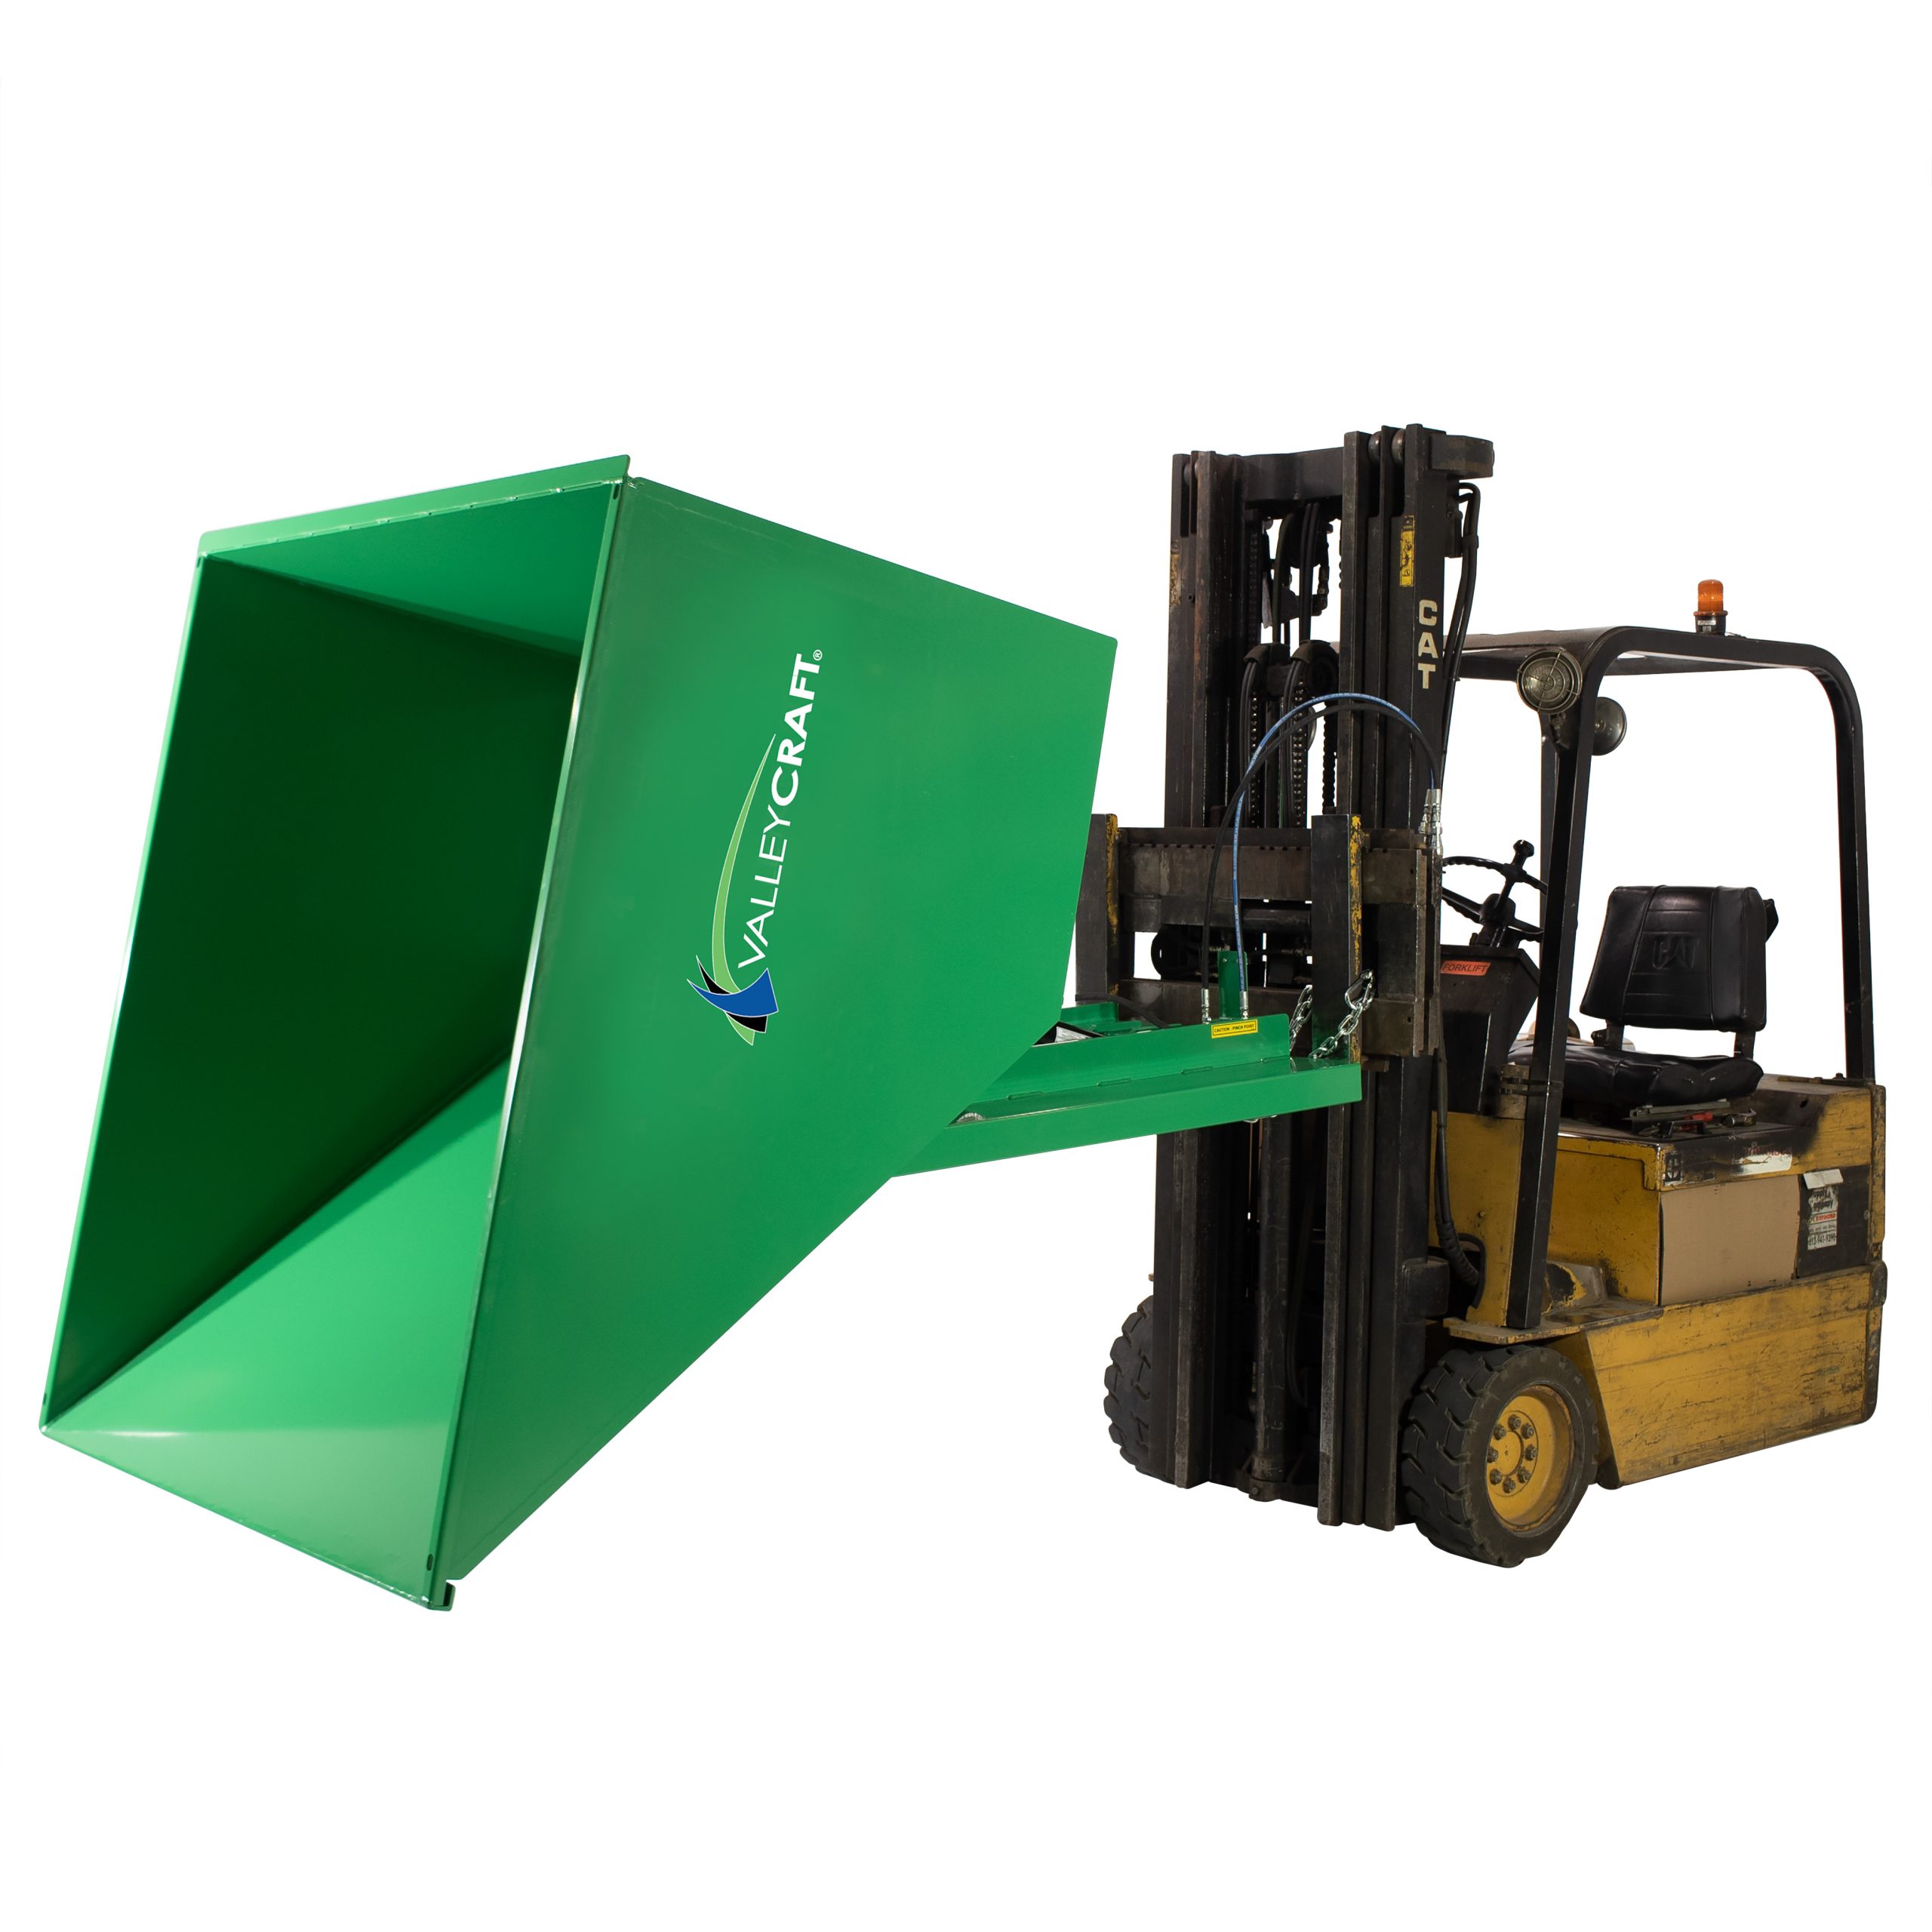 Valley Craft Powered Self-Dumping Hopper - Forklift Powered, 2 yd³, 6000 lb. Capacity